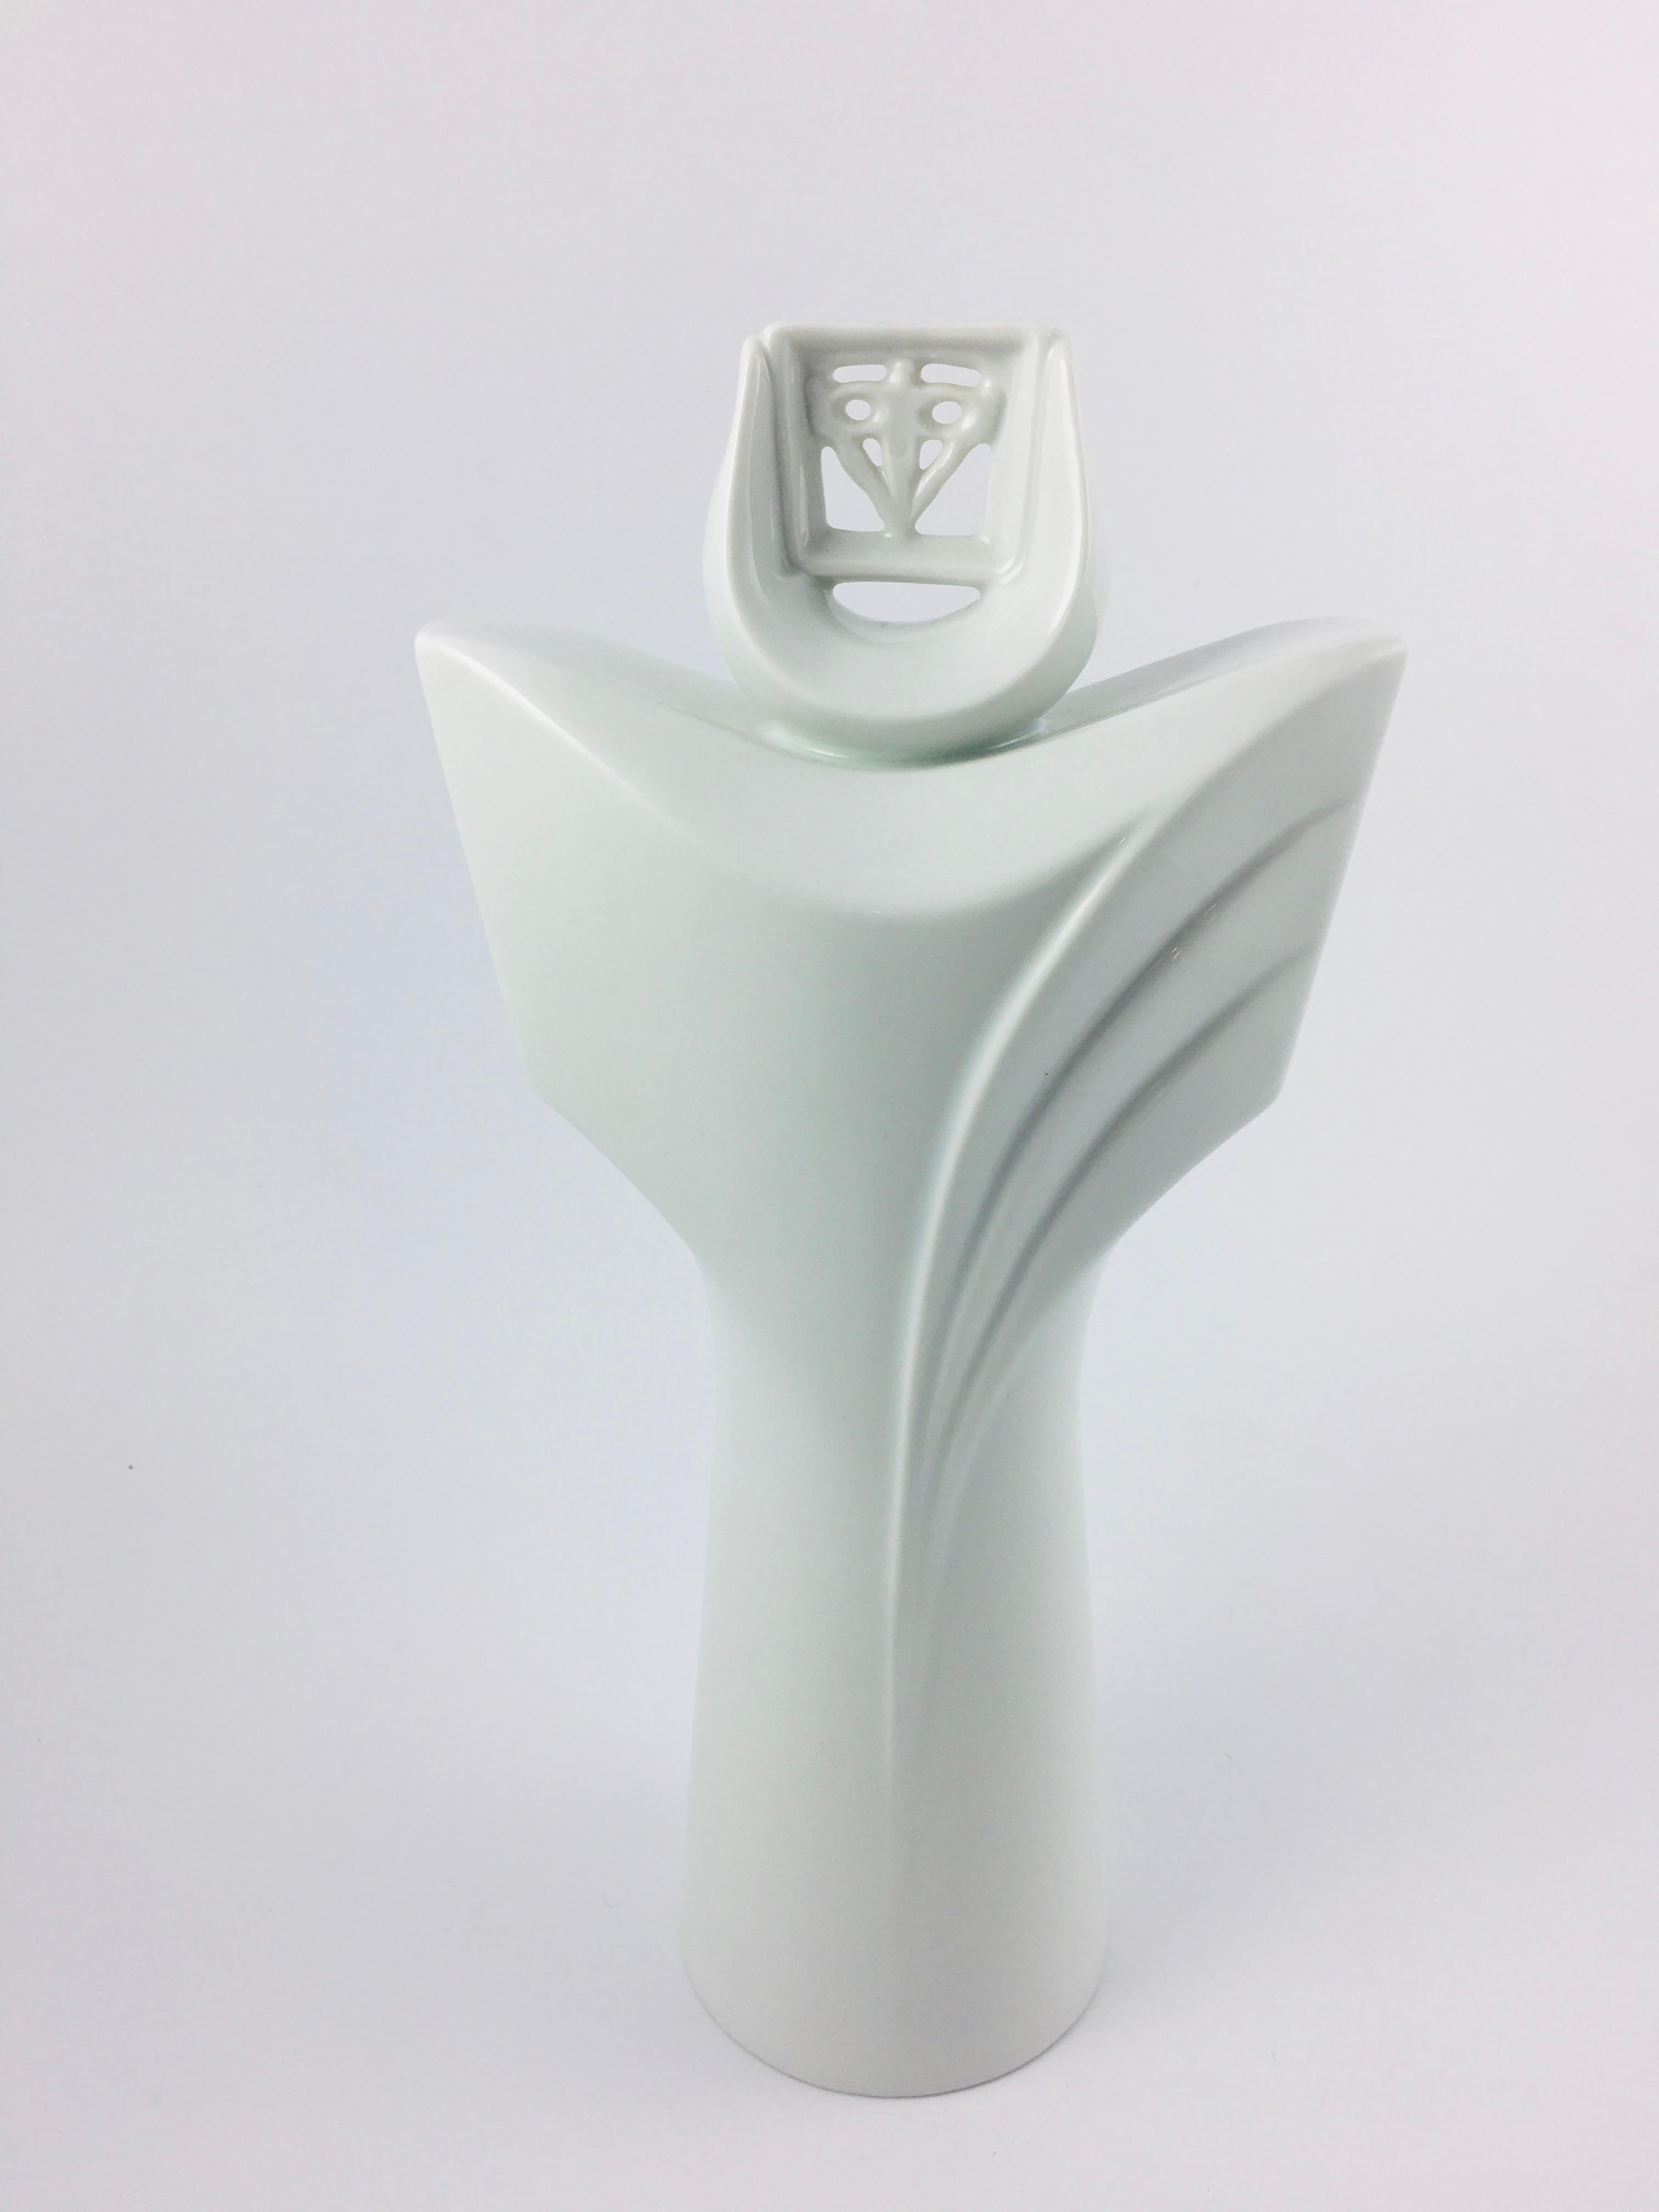 Mid-20th Century Modern Abstract White Porcelain Figure from Hungary, 1960s For Sale